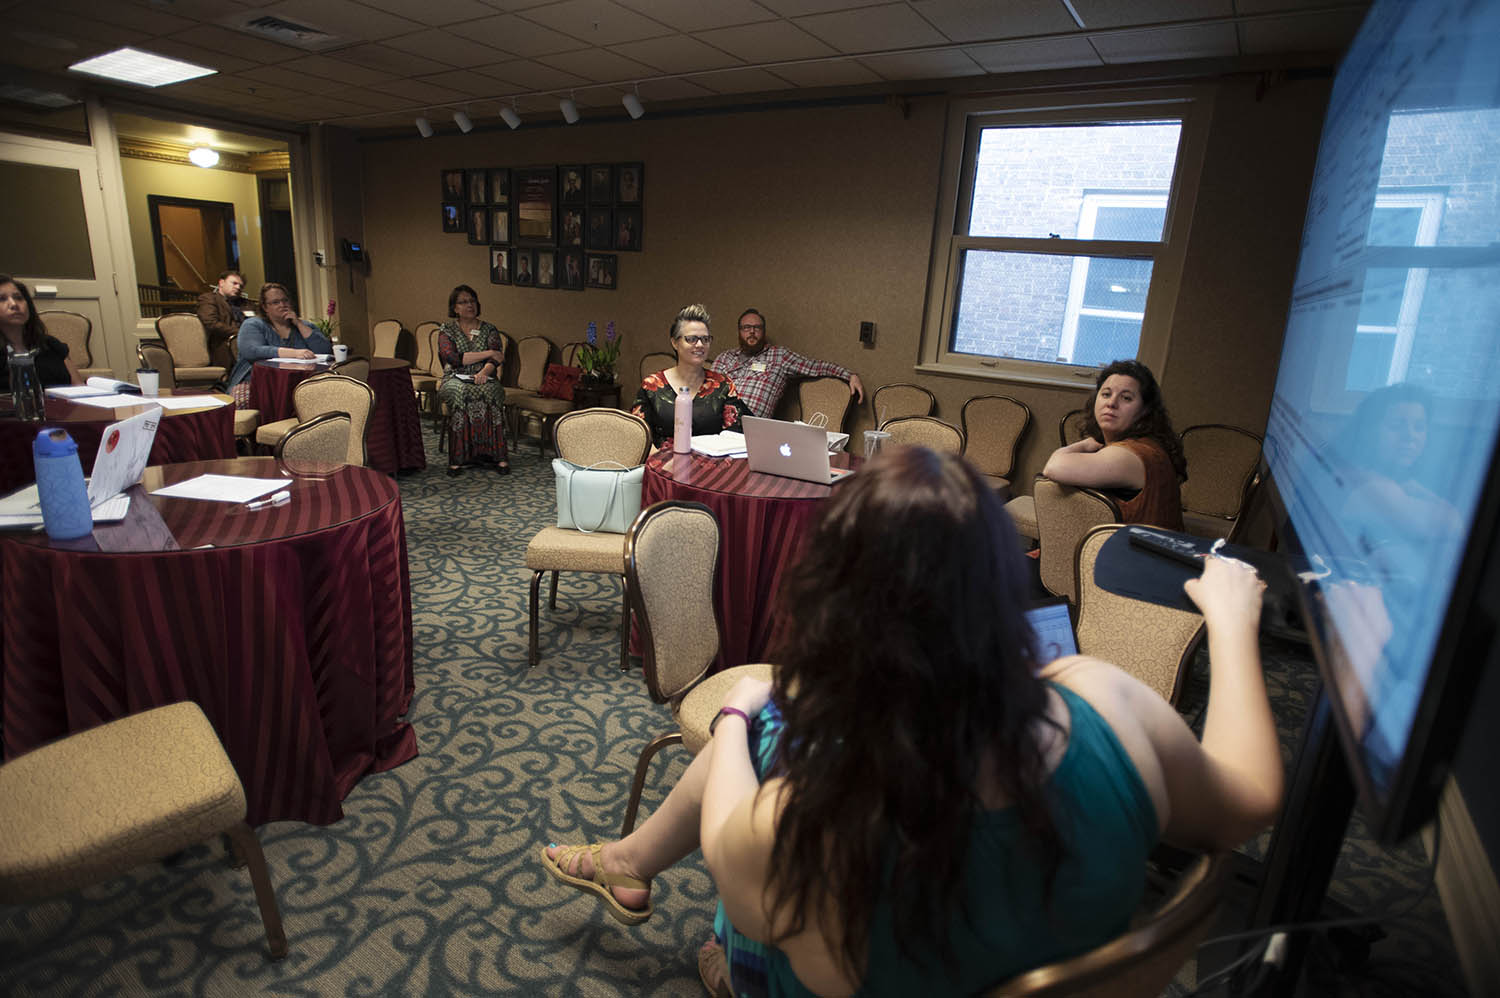 Conference goers meet in the Delack Guild Room during TM3, Theatre Manager Third National Conference, at Proctors in Schenectady Thursday, May 3, 2018.